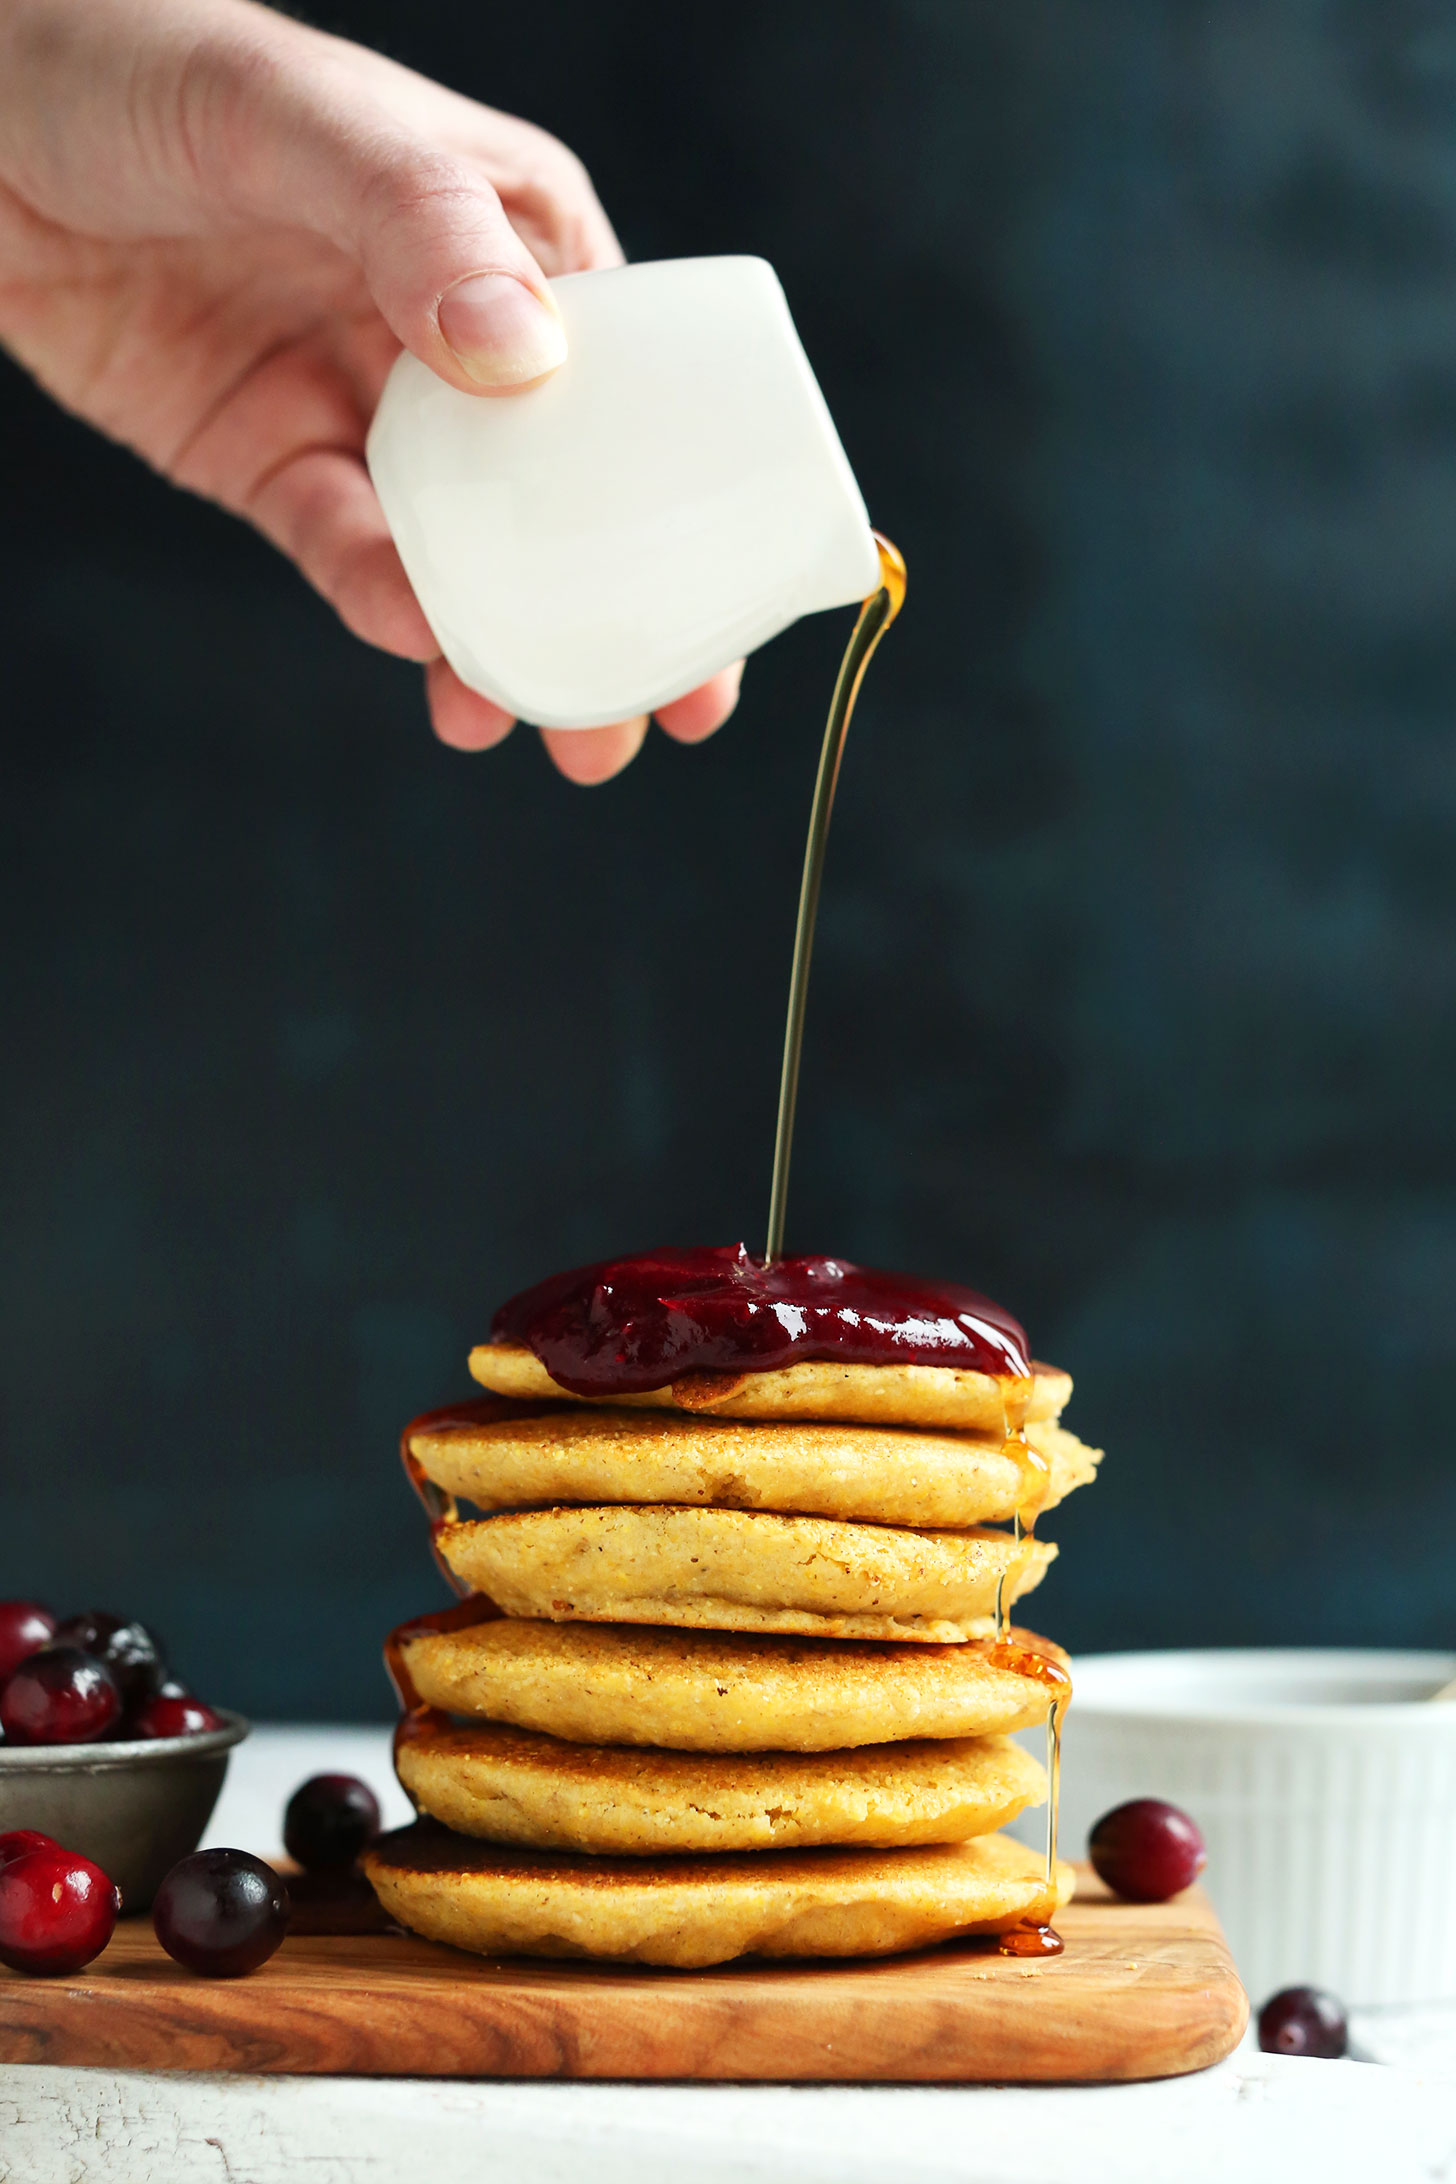 Drizzling syrup onto a stack of gluten-free vegan cornmeal pancakes topped with cranberry compote